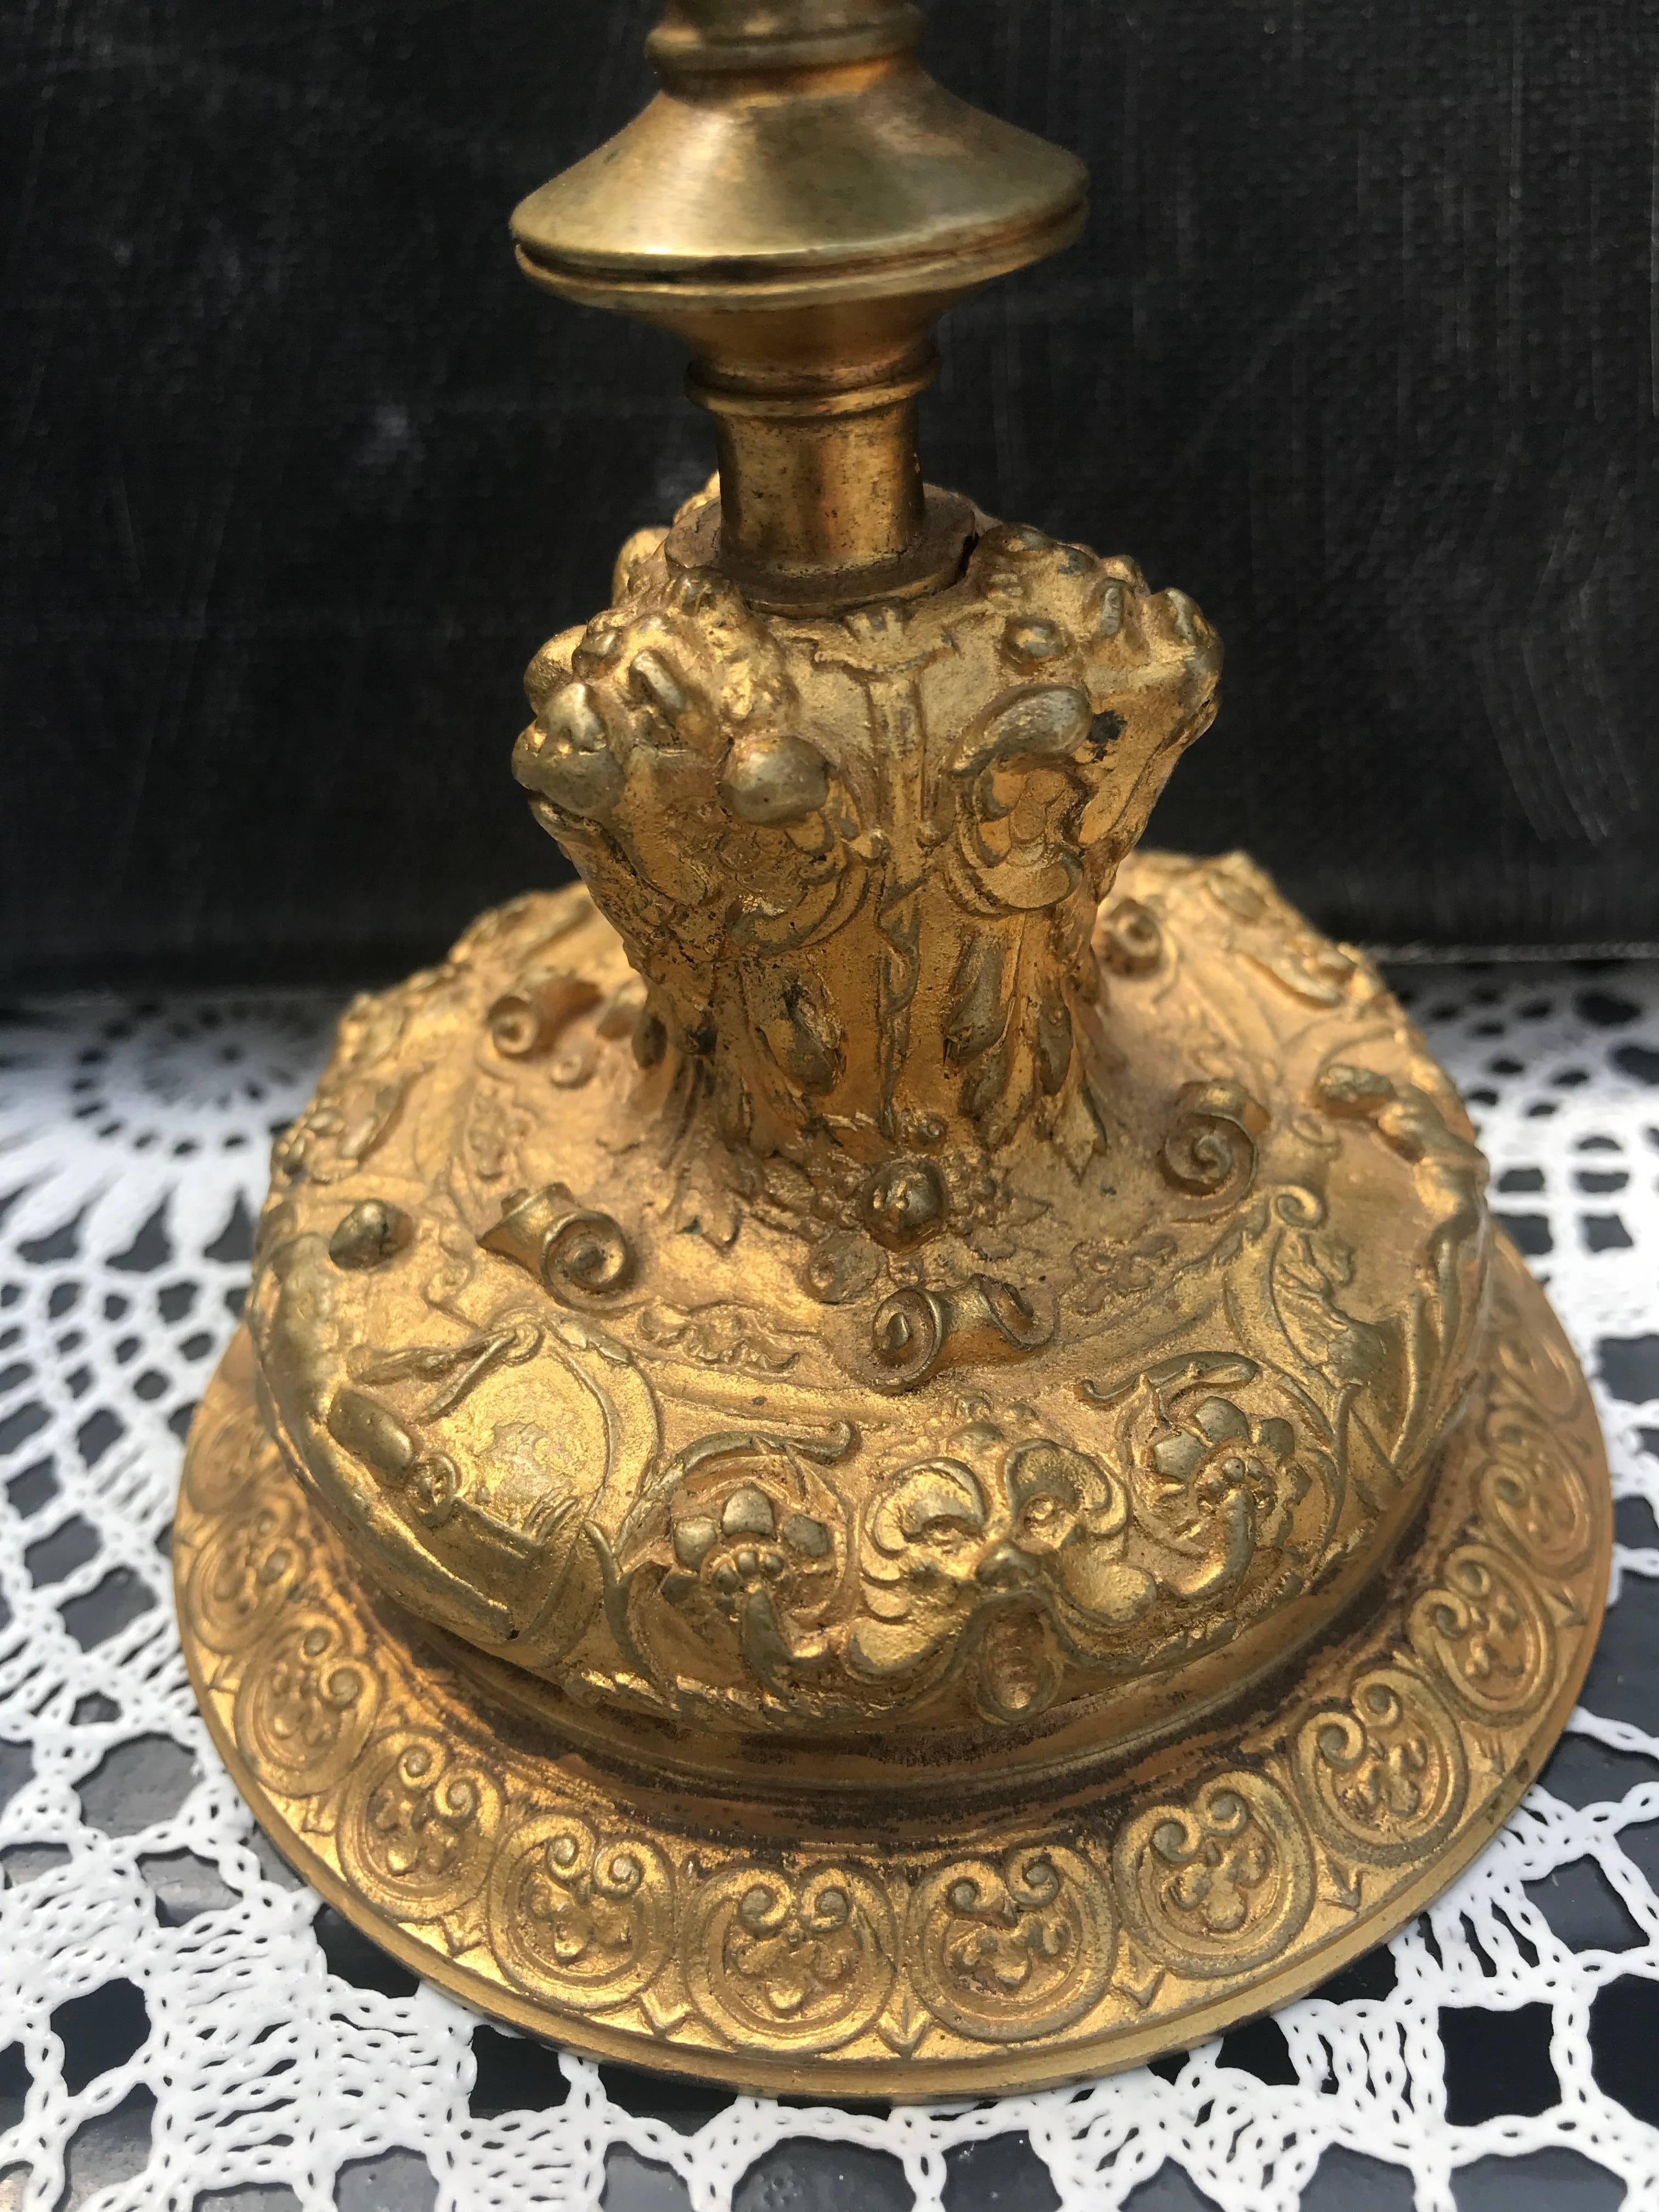 Practical size and highly decorative bronze candleholders. 

If you are looking for a rare pair of antique, fine bronze candle holders than this attractive and highly decorative pair could be flying your way soon. The work that has gone into